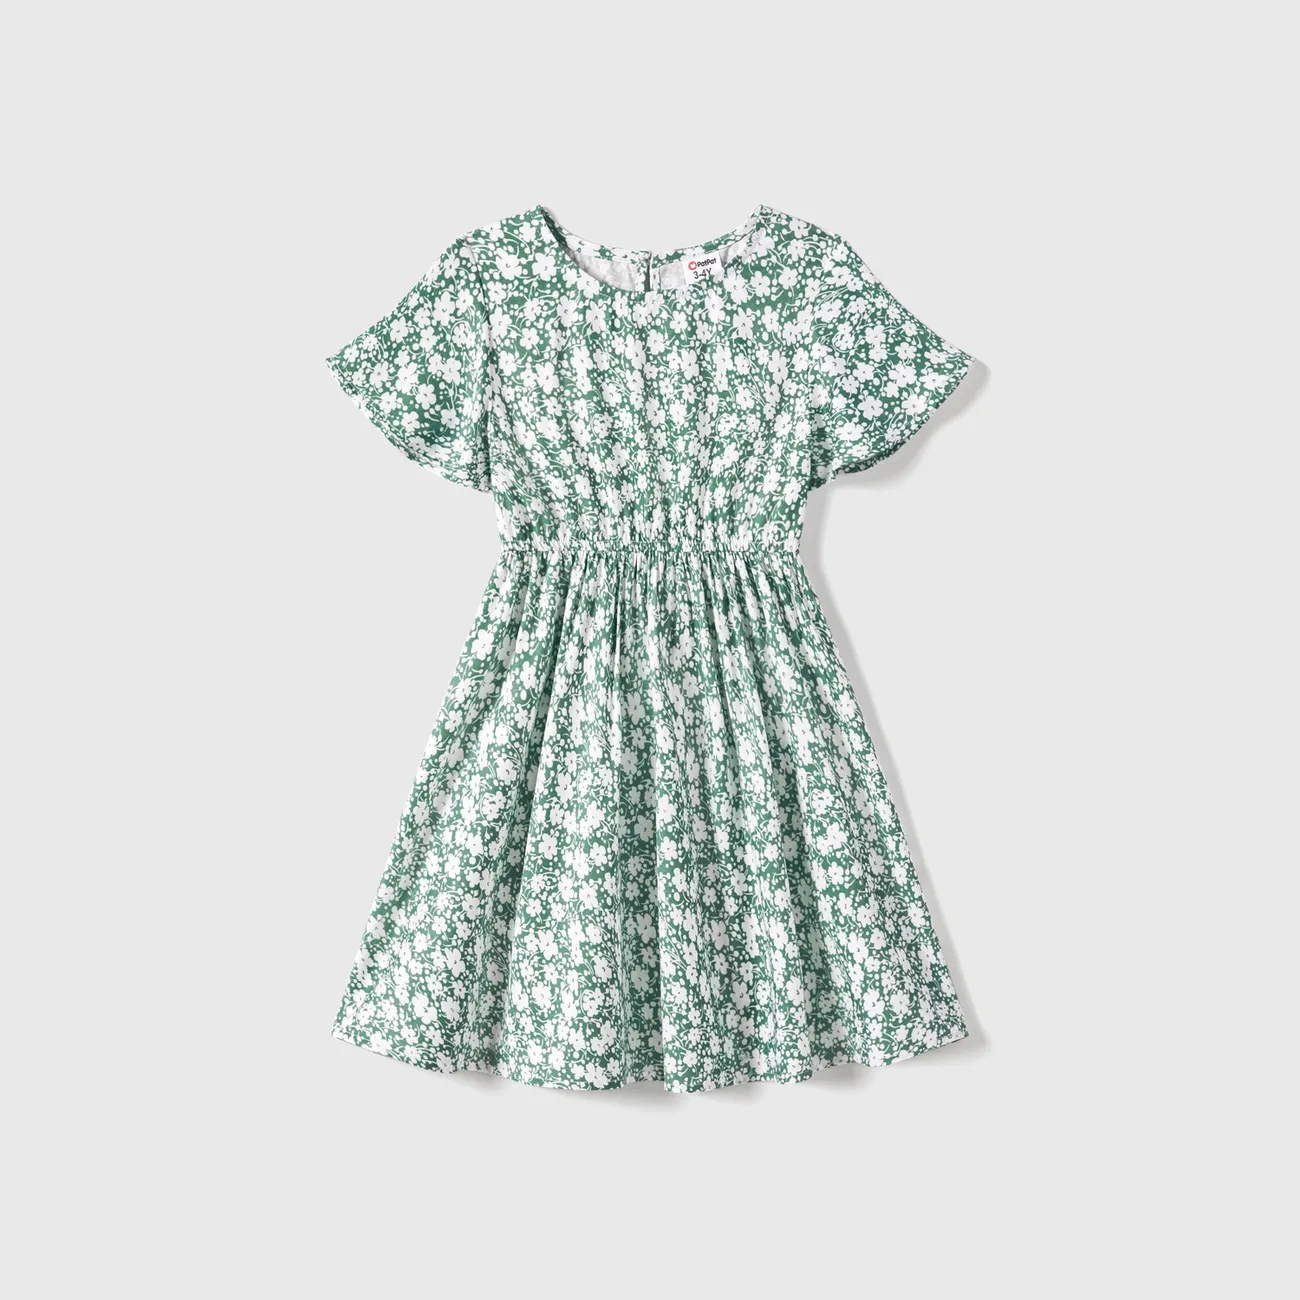 Family Matching Allover Floral Print Short-sleeve Dresses and Color Block Tops Sets Green/White big image 1